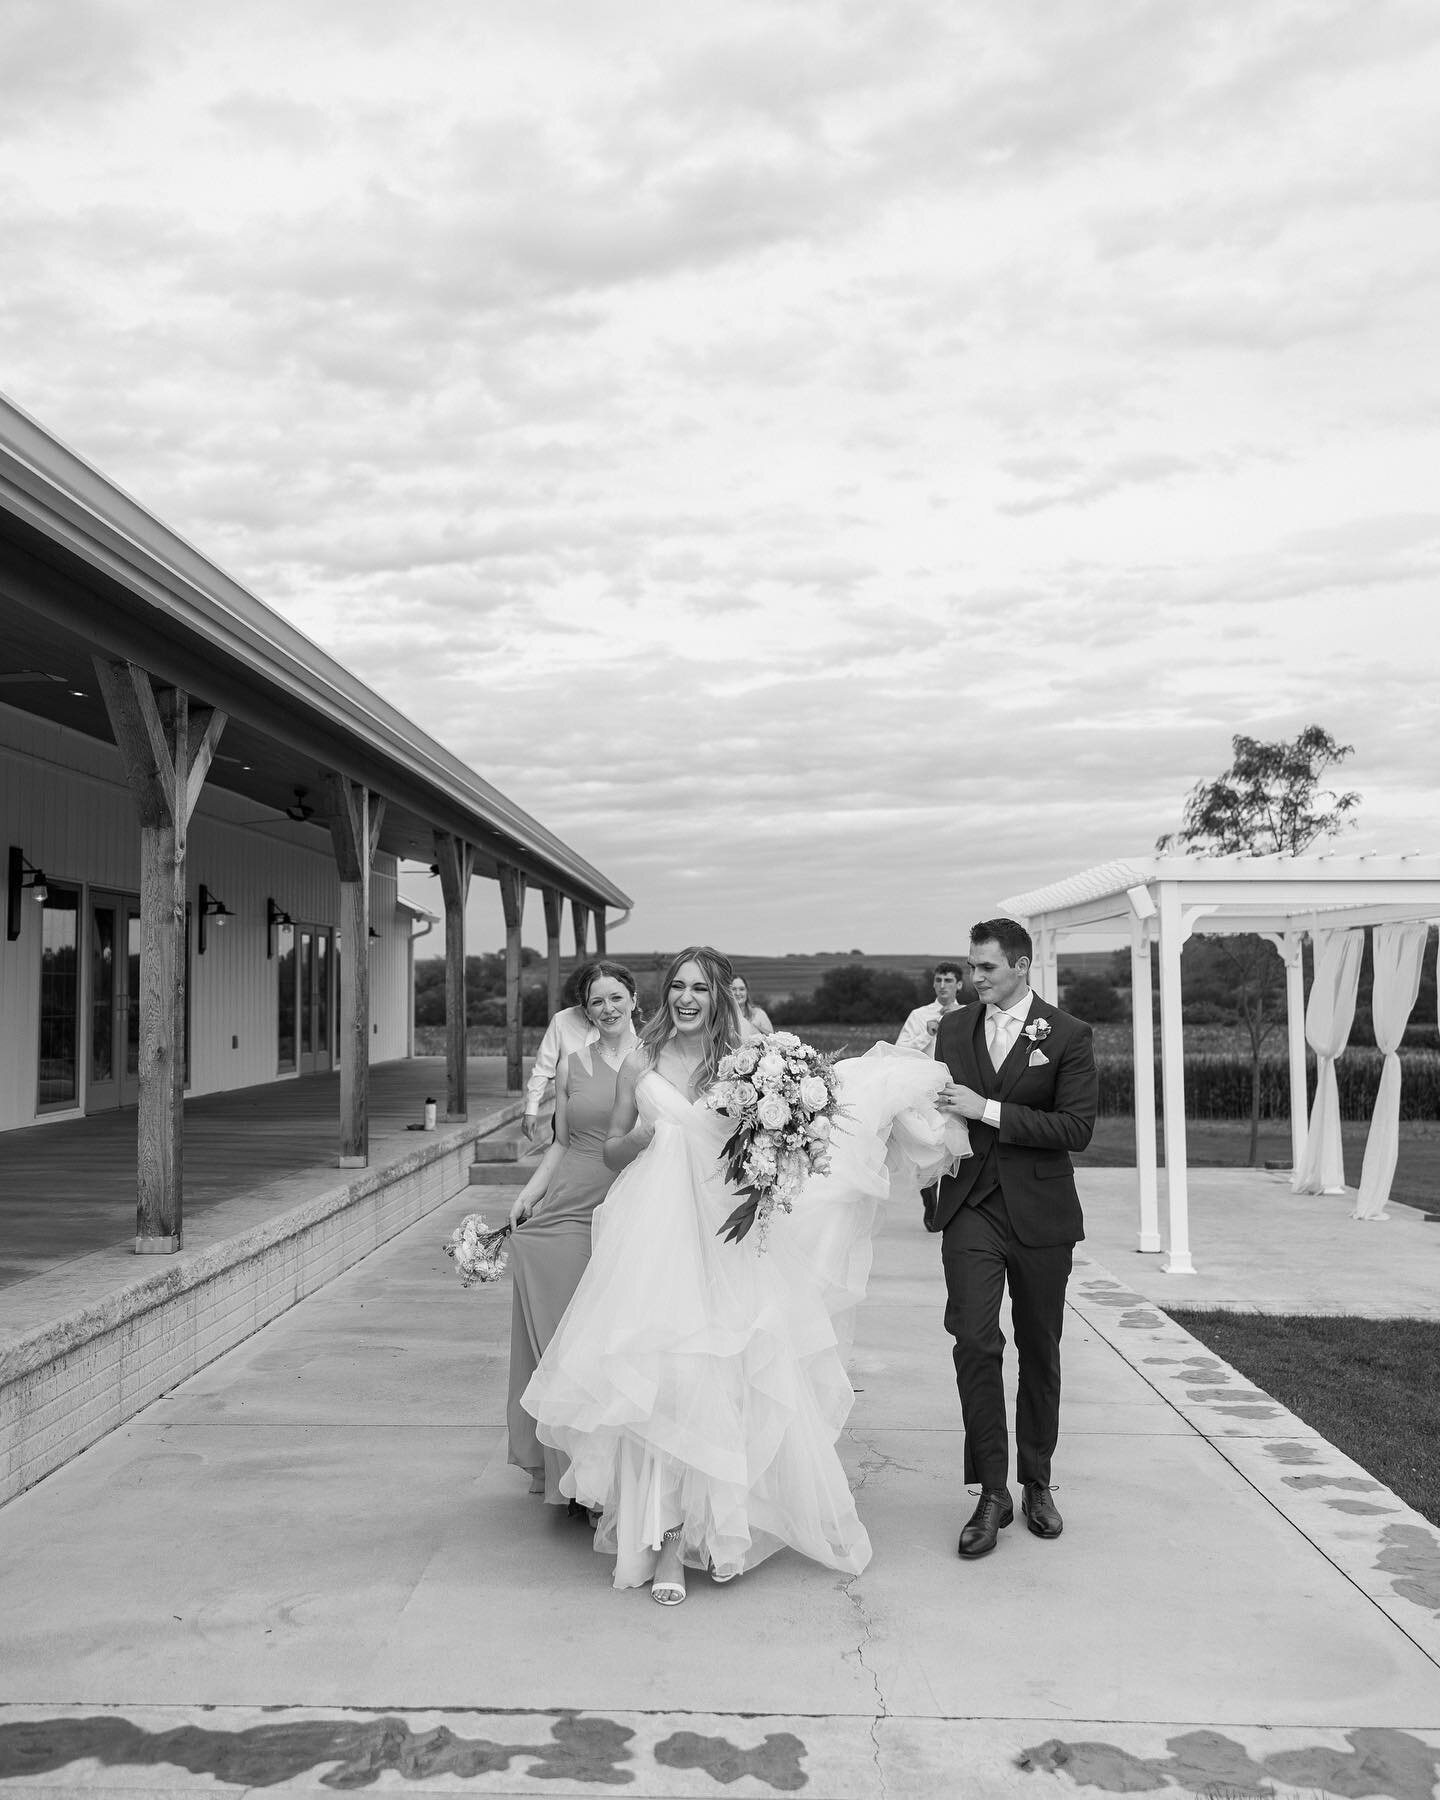 After the rain&hellip; the sun did NOT disappoint ☀️ our favorite thing is going through photos and footage following wedding day and reliving all the best moments again !! We love getting to send off all the smiles, love, laughter, and tears from su